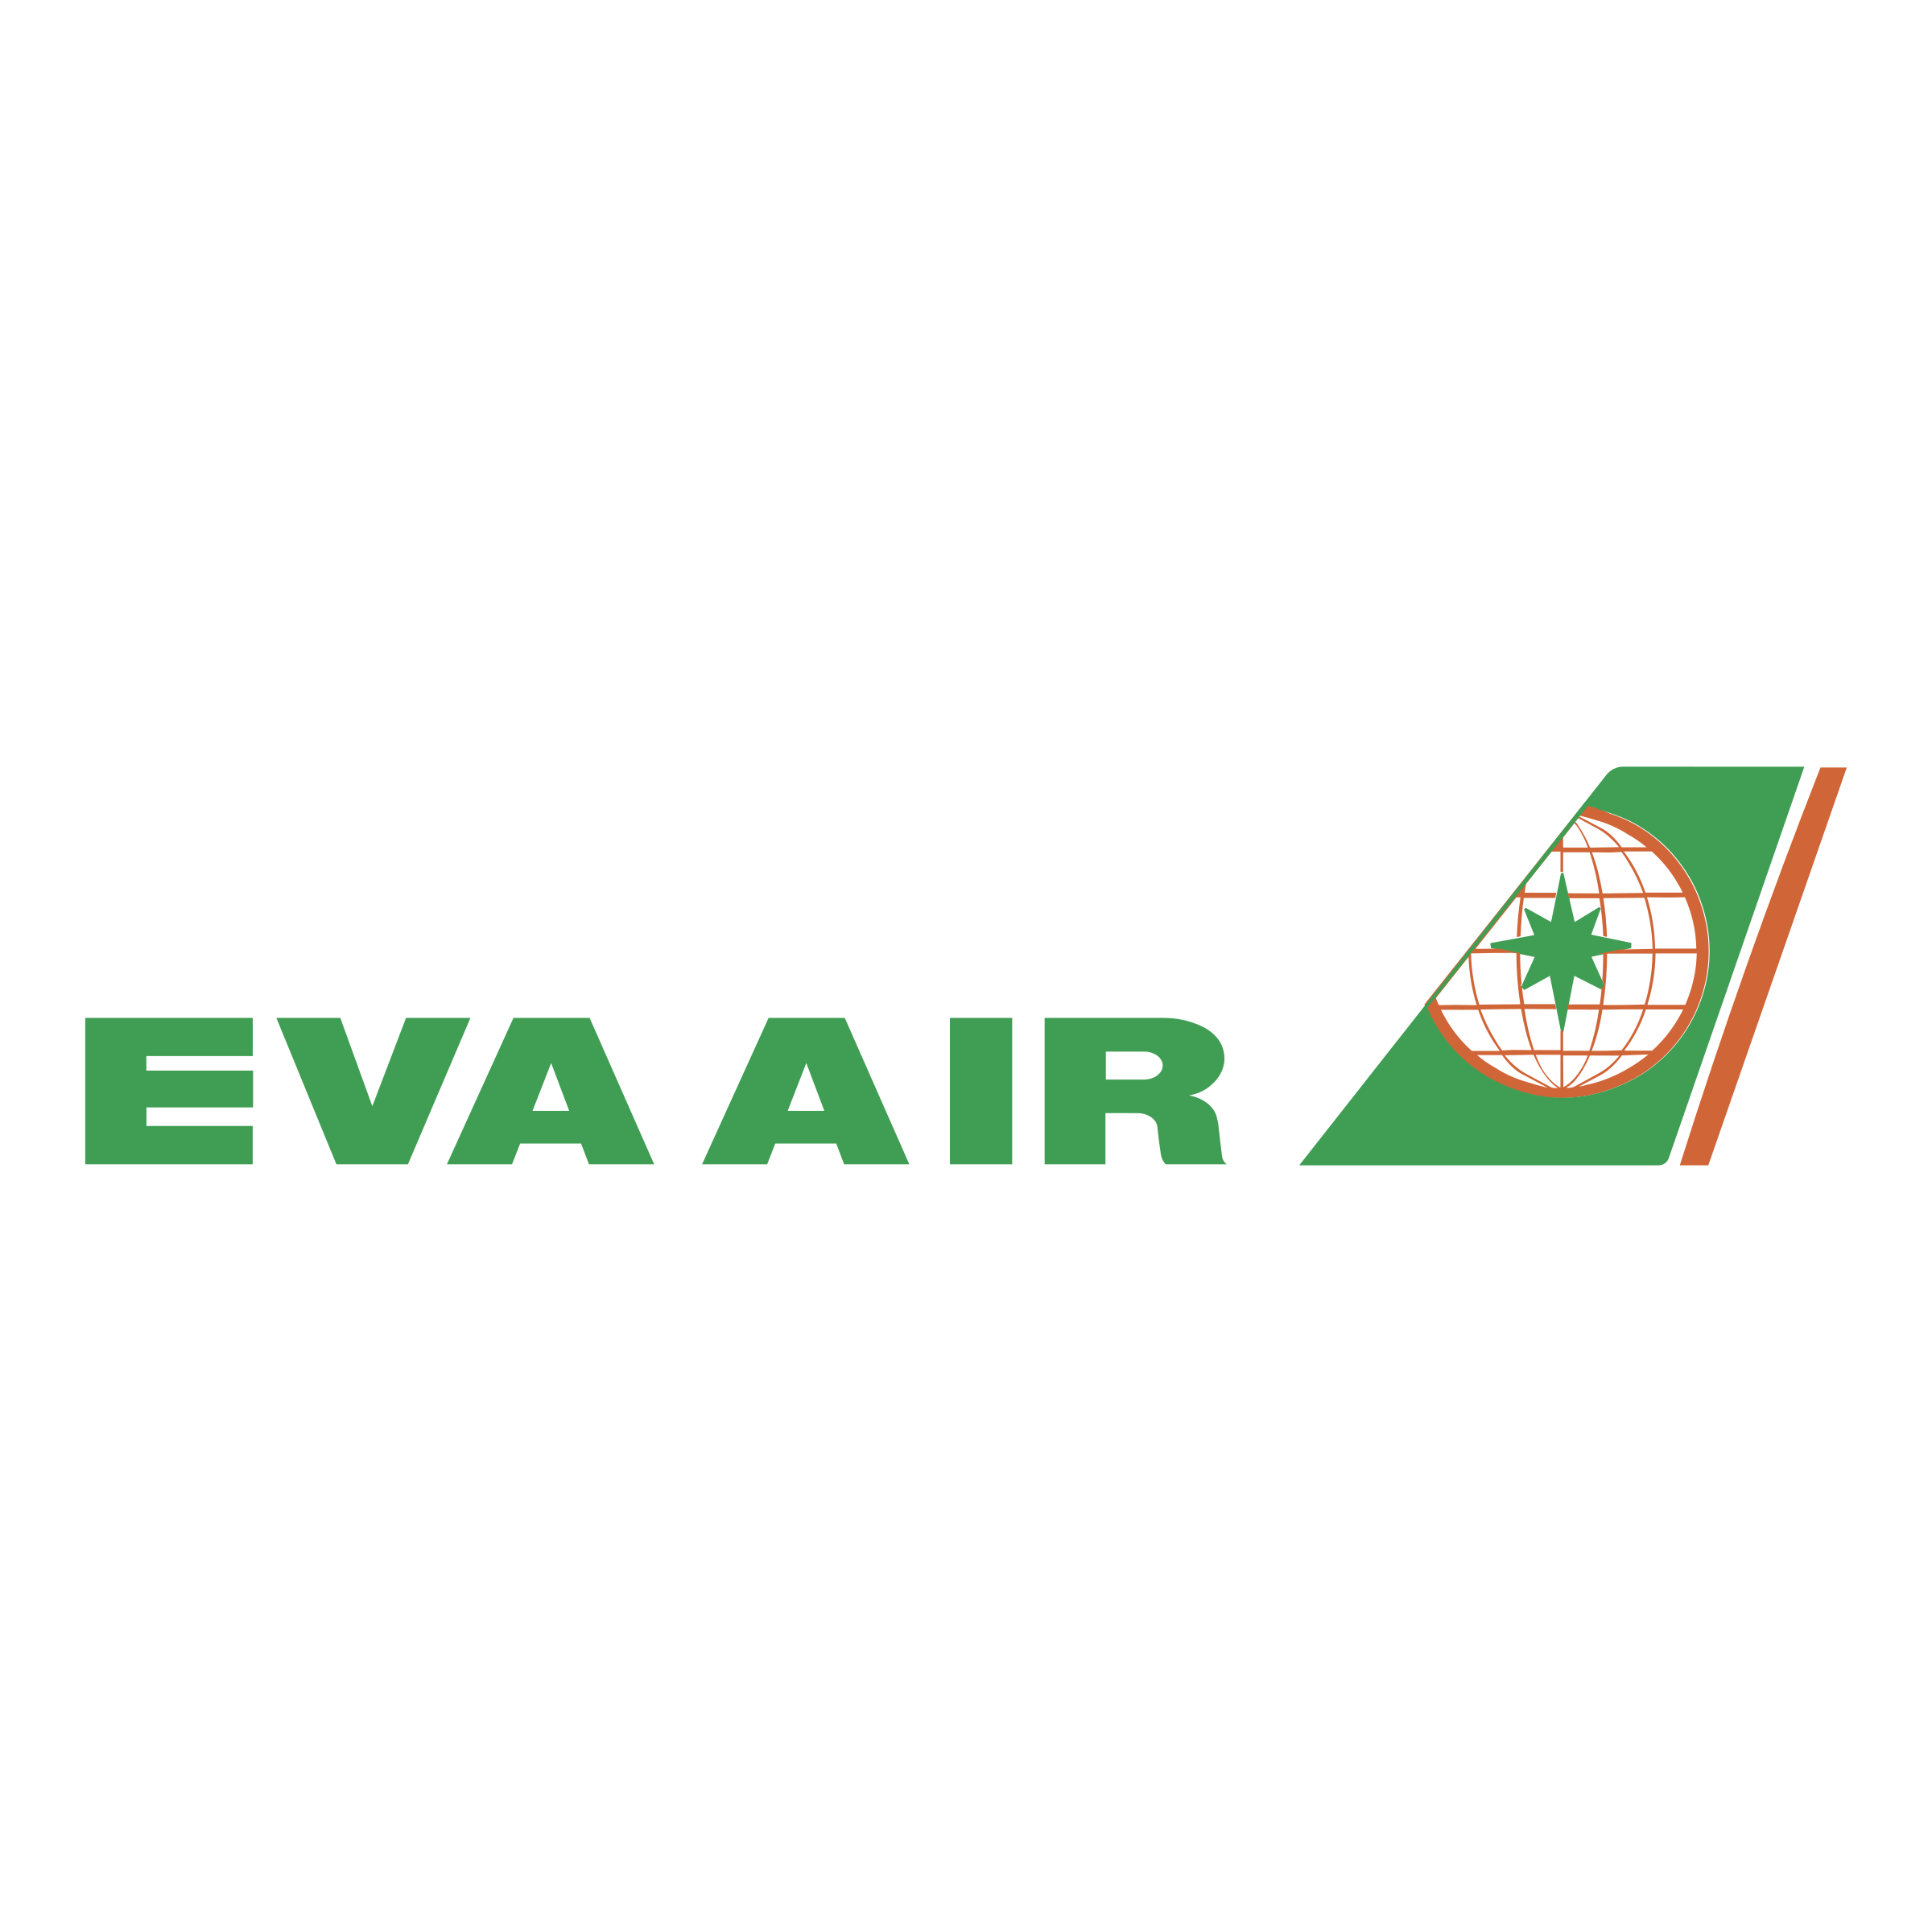 Travel PR News EVA Air Named as One of the World’s Safest Airlines by